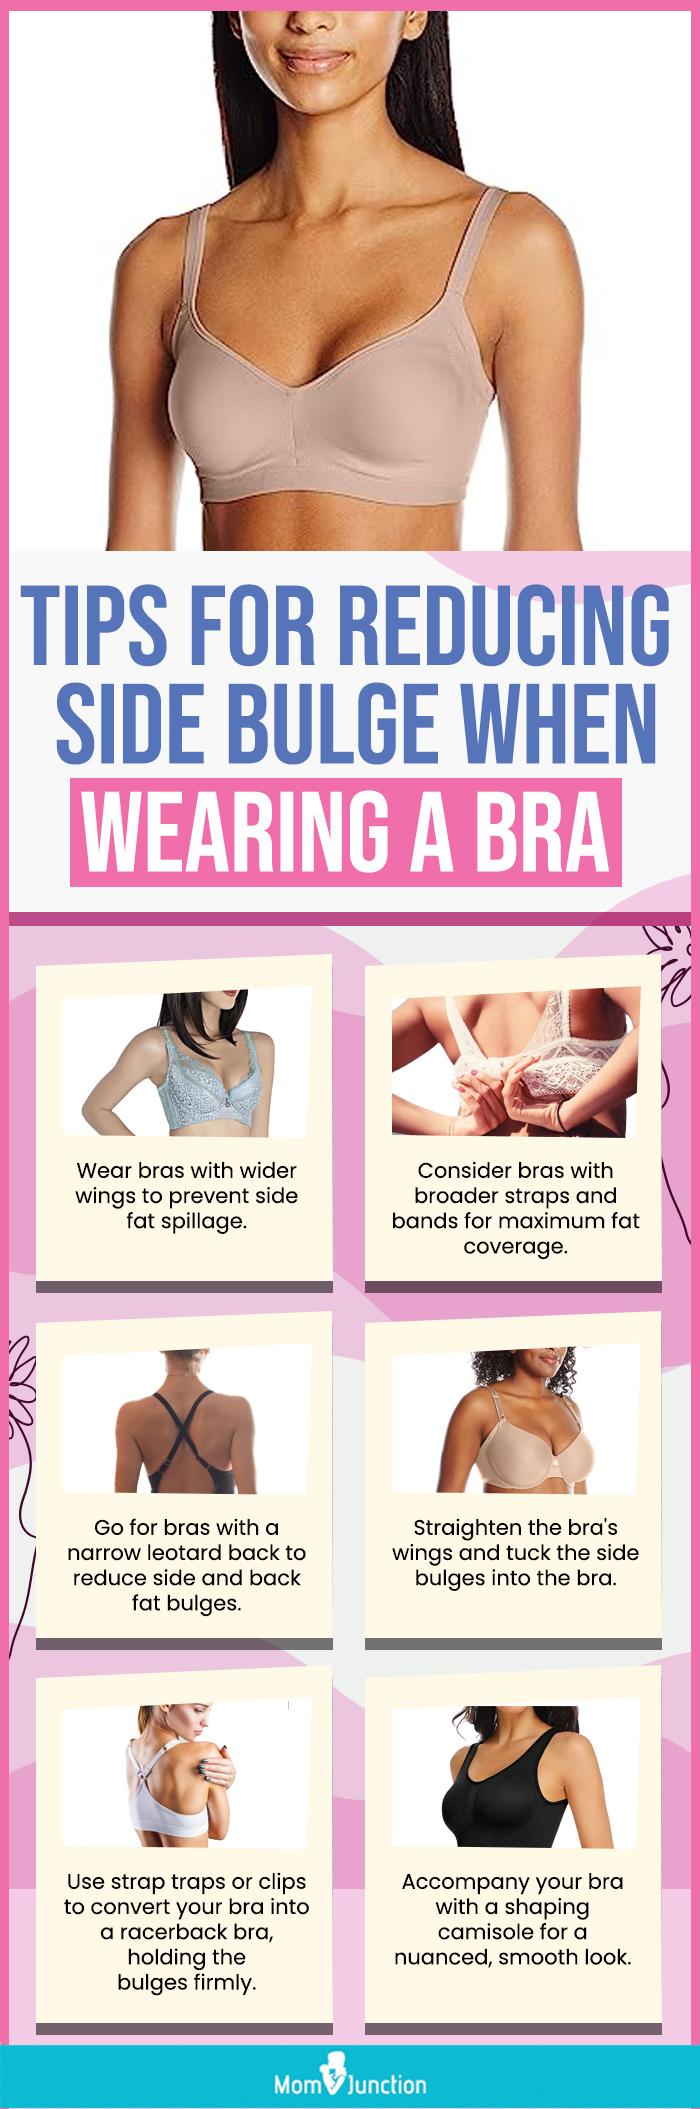 Bye-Bye Bra Bulge: How To Get Rid Of Armpit Fat With 6 Proven